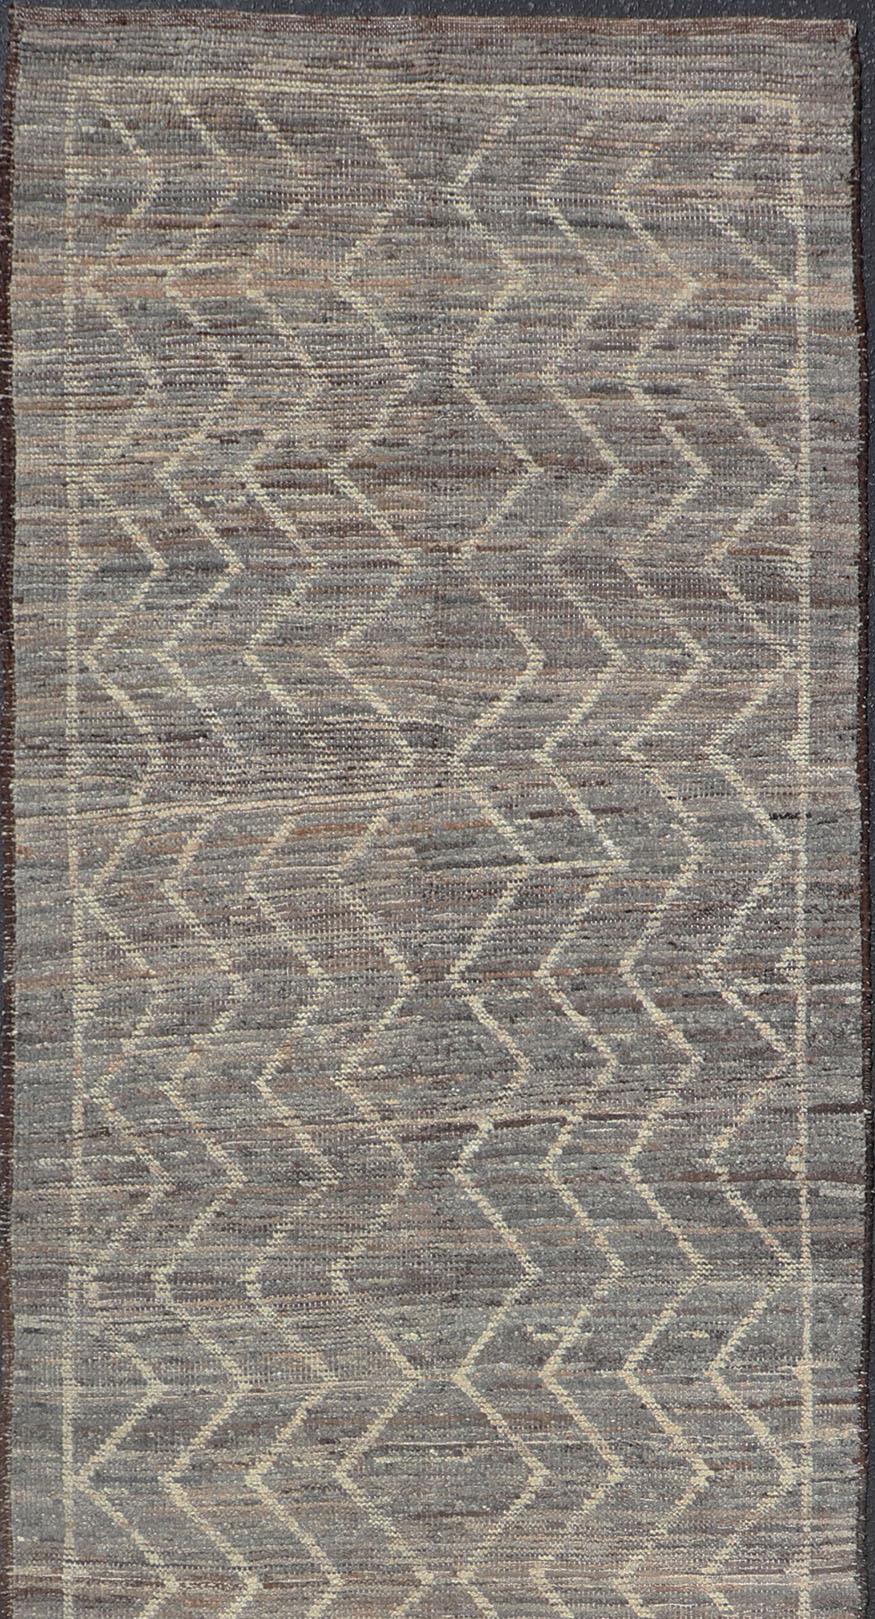 Neutral-toned variegated tribal design modern rug, Keivan Woven Arts / rug AFG-36108, country of origin / type: Afghanistan / Modern, Modern Casual rug with tribal design in light gray, taupe, brown and natural colors

This Modern casual rug